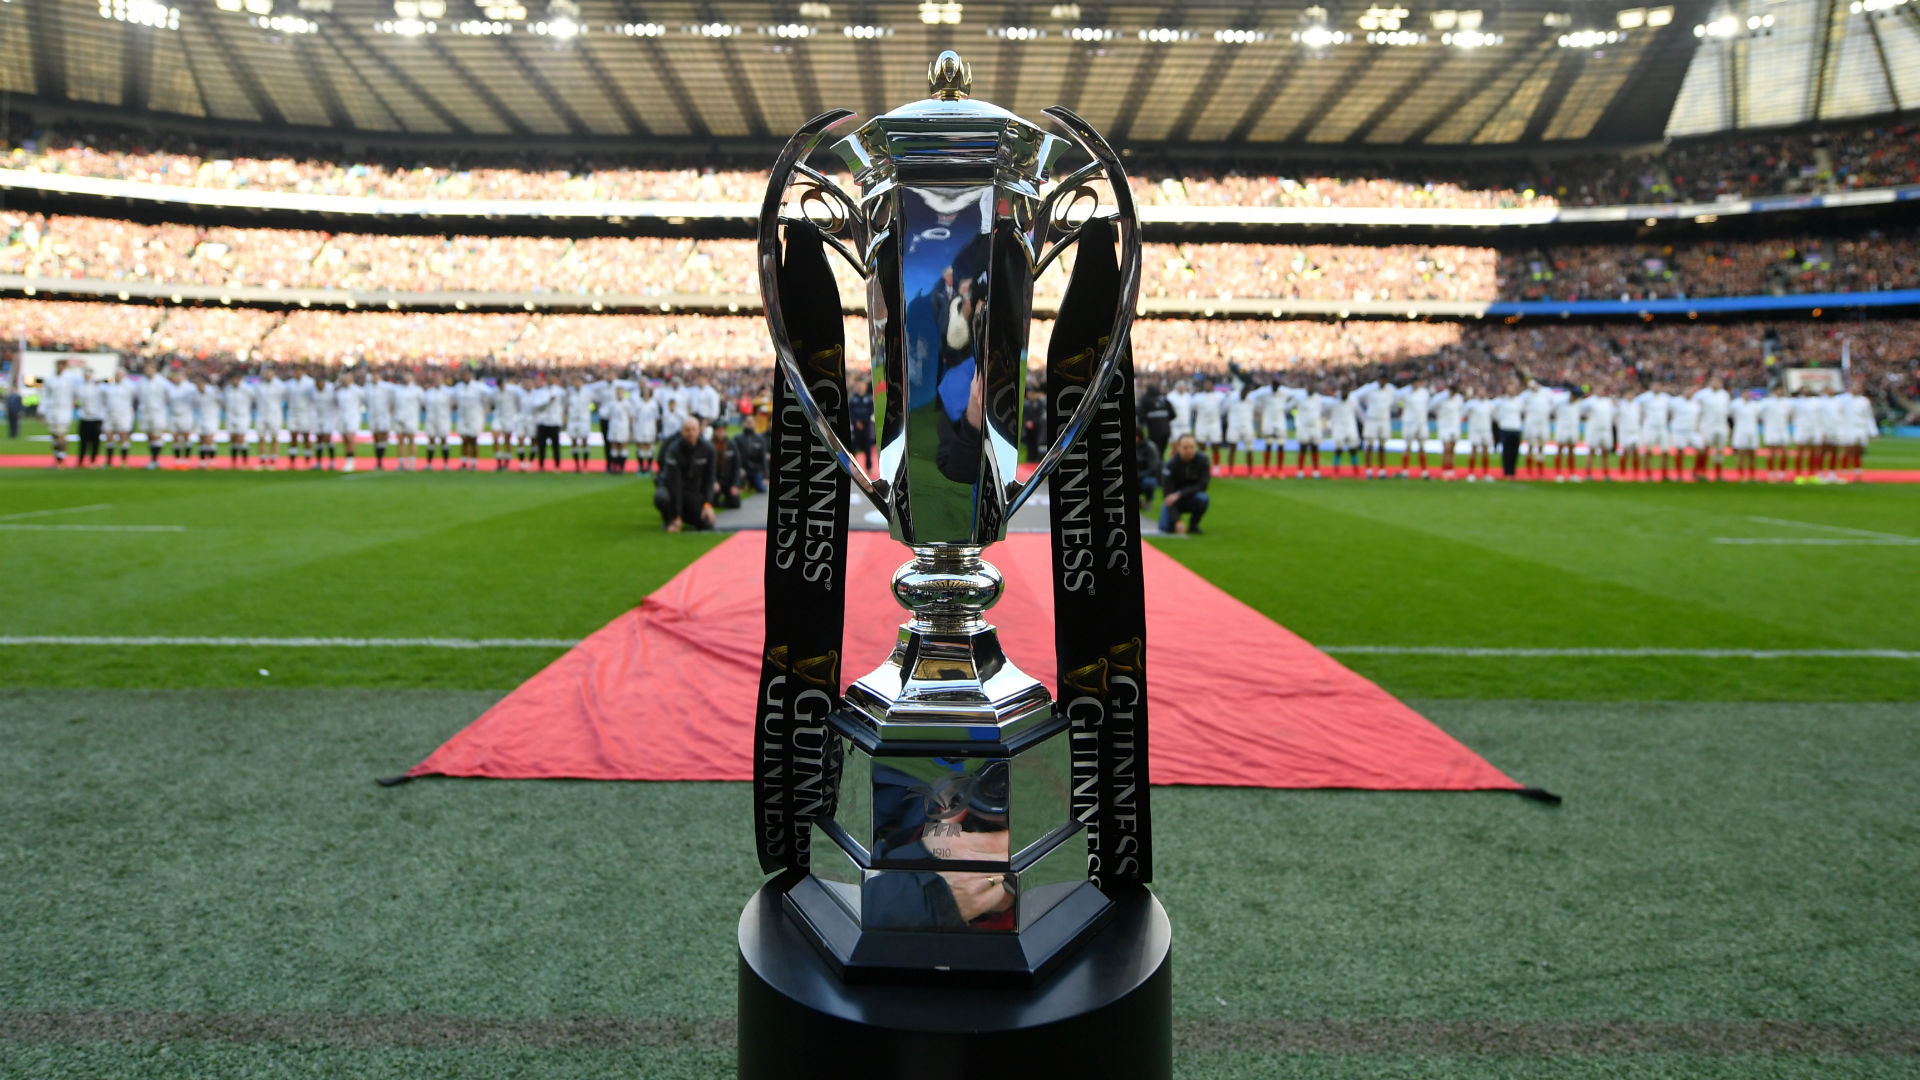 The Six Nations champions are set to be crowned at the end of October and it remains to see if there will be any fans in attendance.